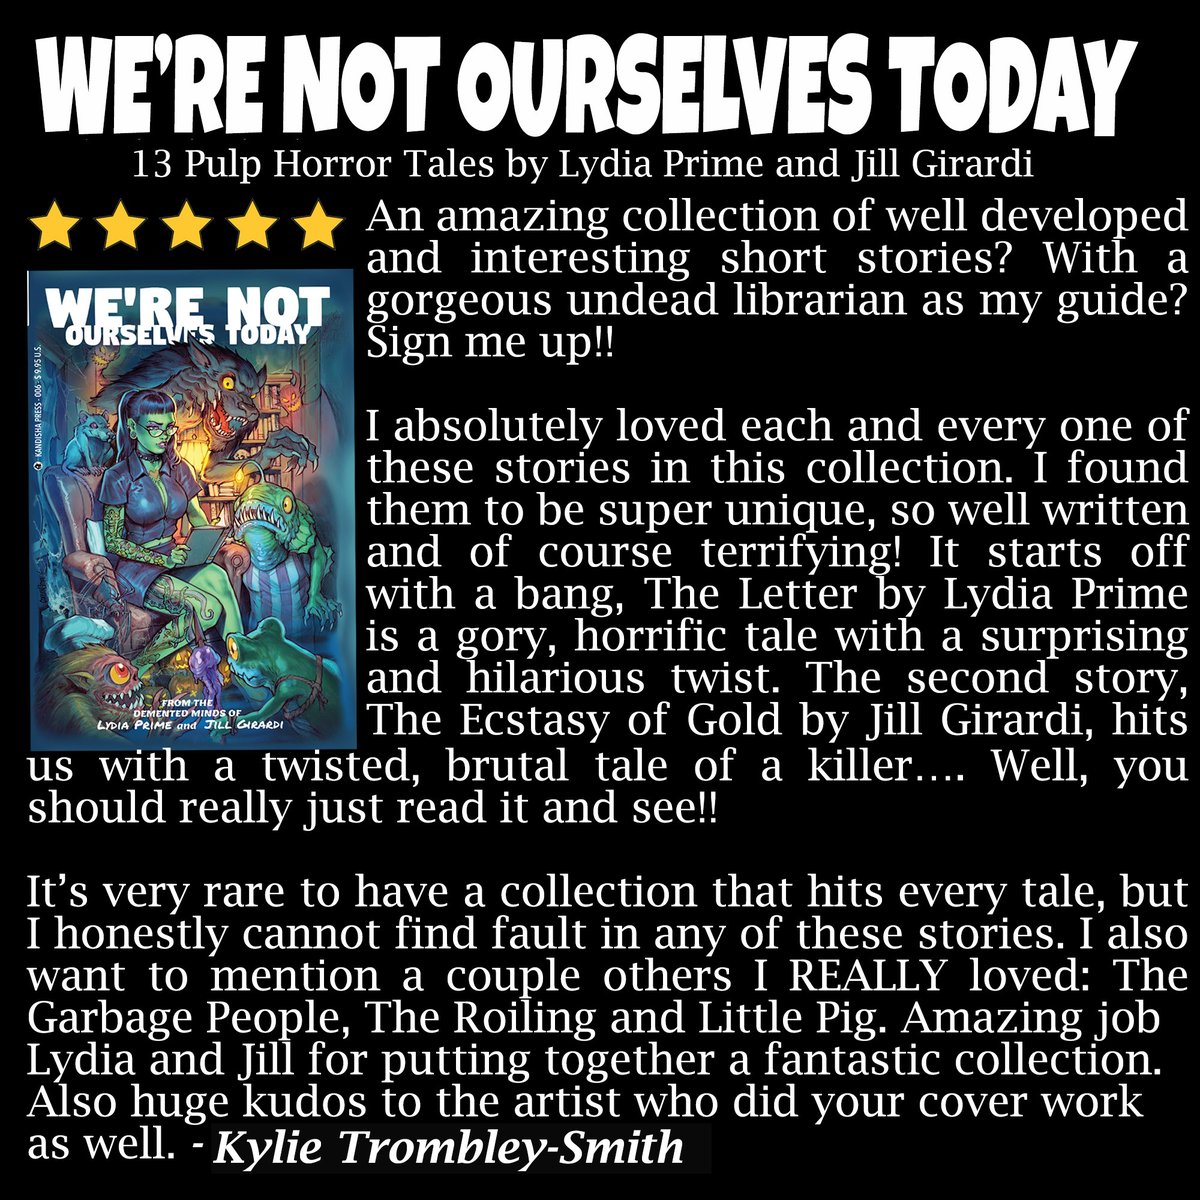 Today's review is from Kylie Trombley-Smith. This was one of the first reviews we got, and we were so happy to get such positive feedback. We're Not Ourselves Today By @lydiaprime & @jill_girardi Out now on @kandishapress L!nk in Kommentz! Or get a s!gned c0py from us!